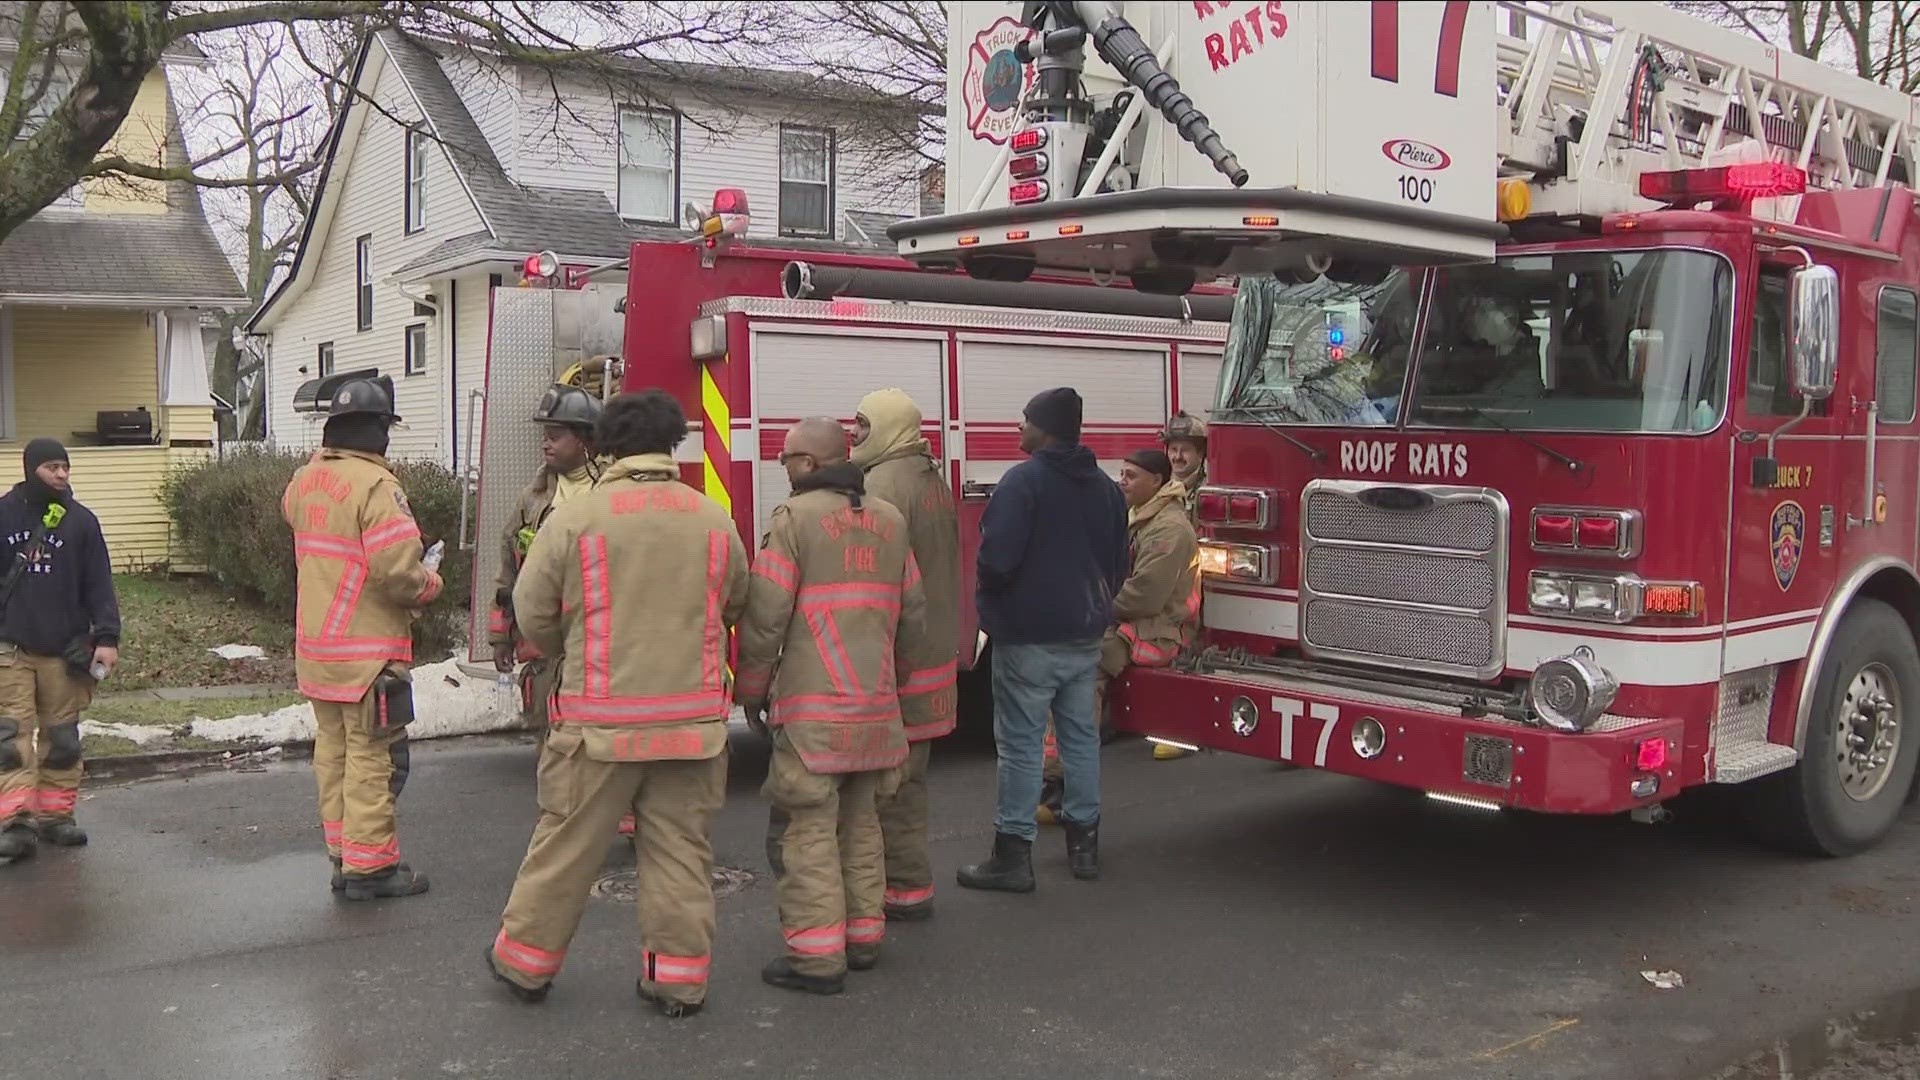 The fire caused an estimated $30,000 in damages, the cause is under investigation.